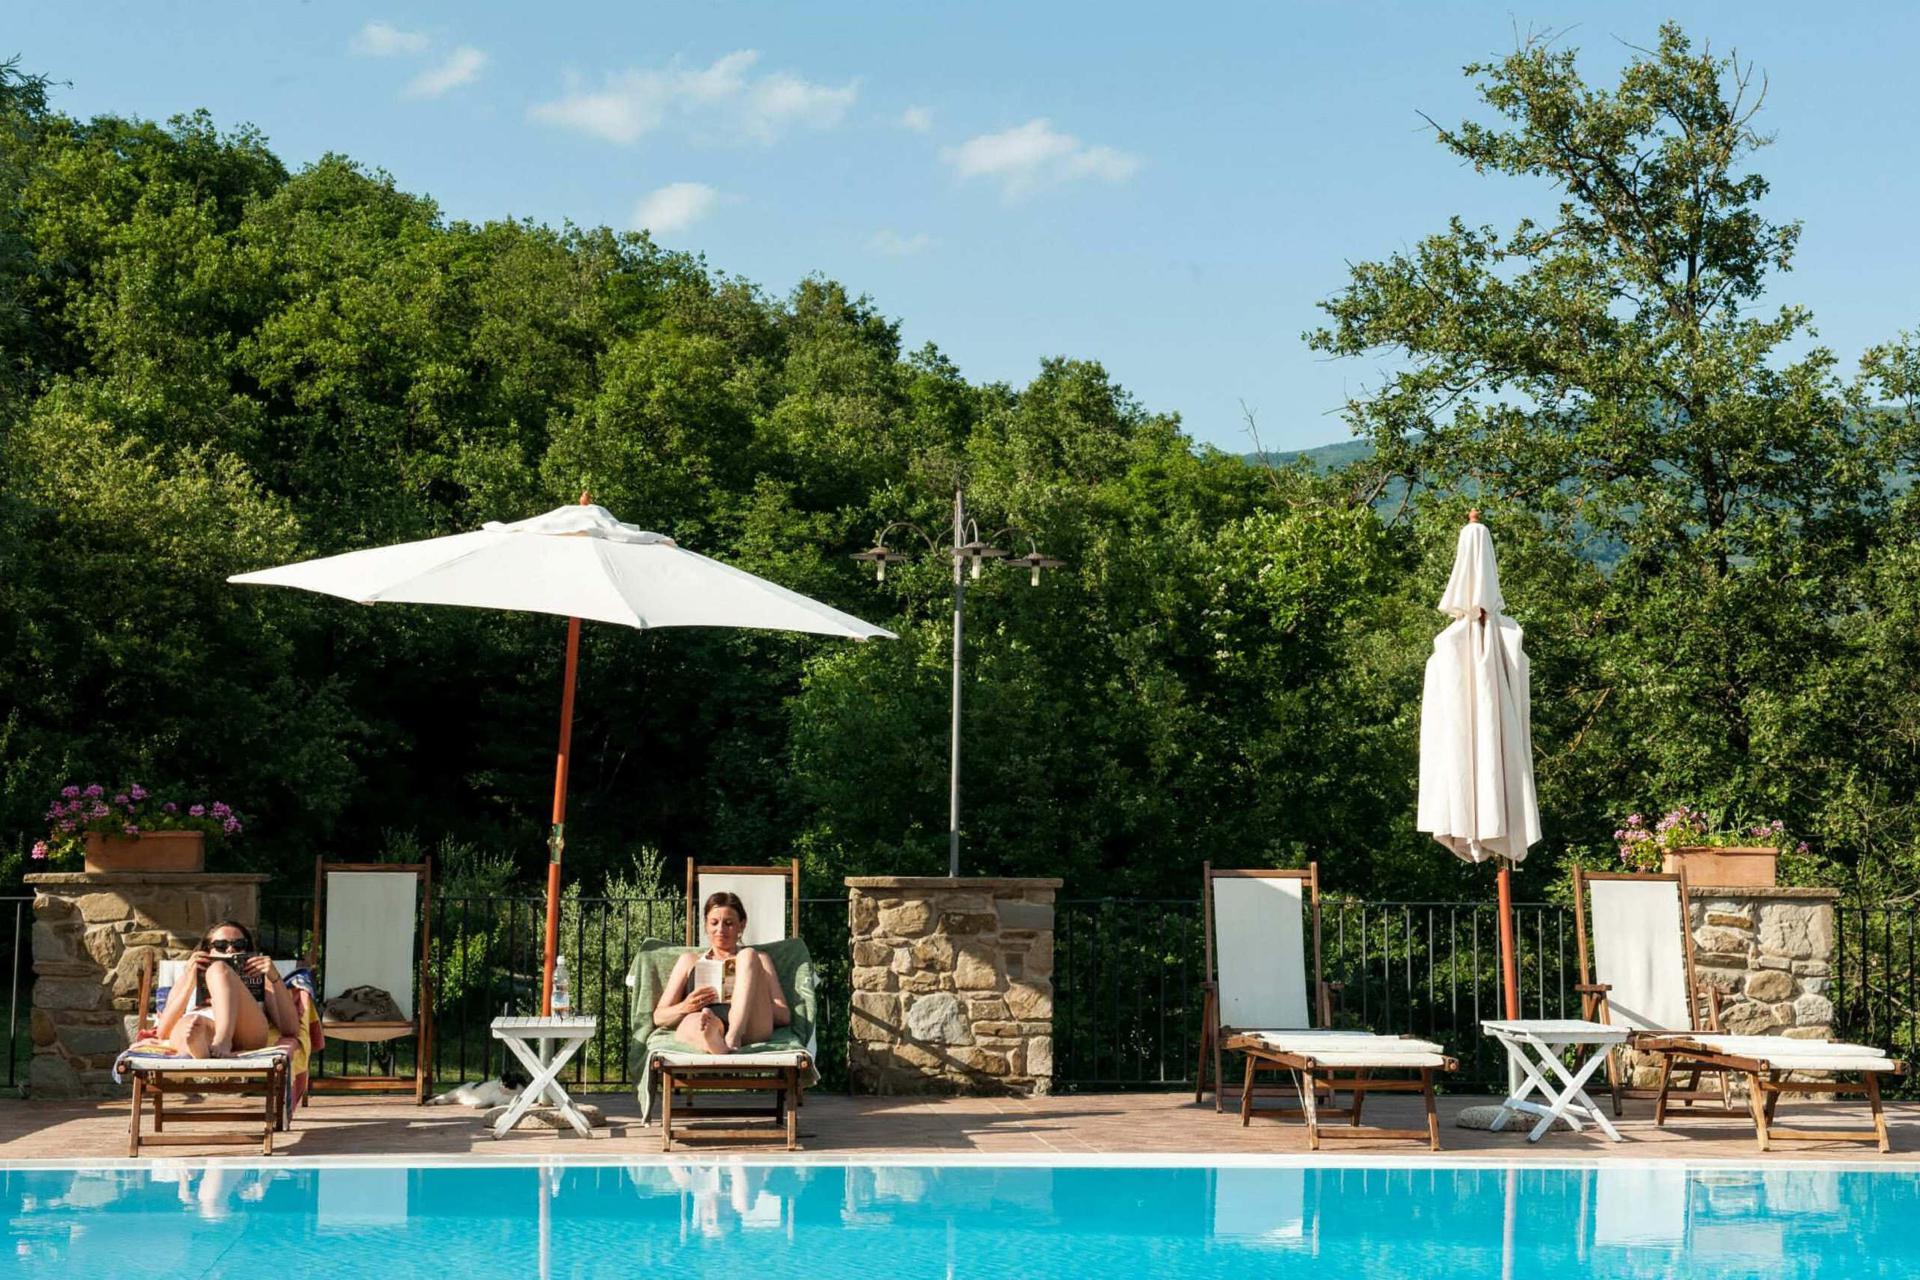 Agriturismo Tuscany Child-friendly and cozy agriturismo in Tuscany